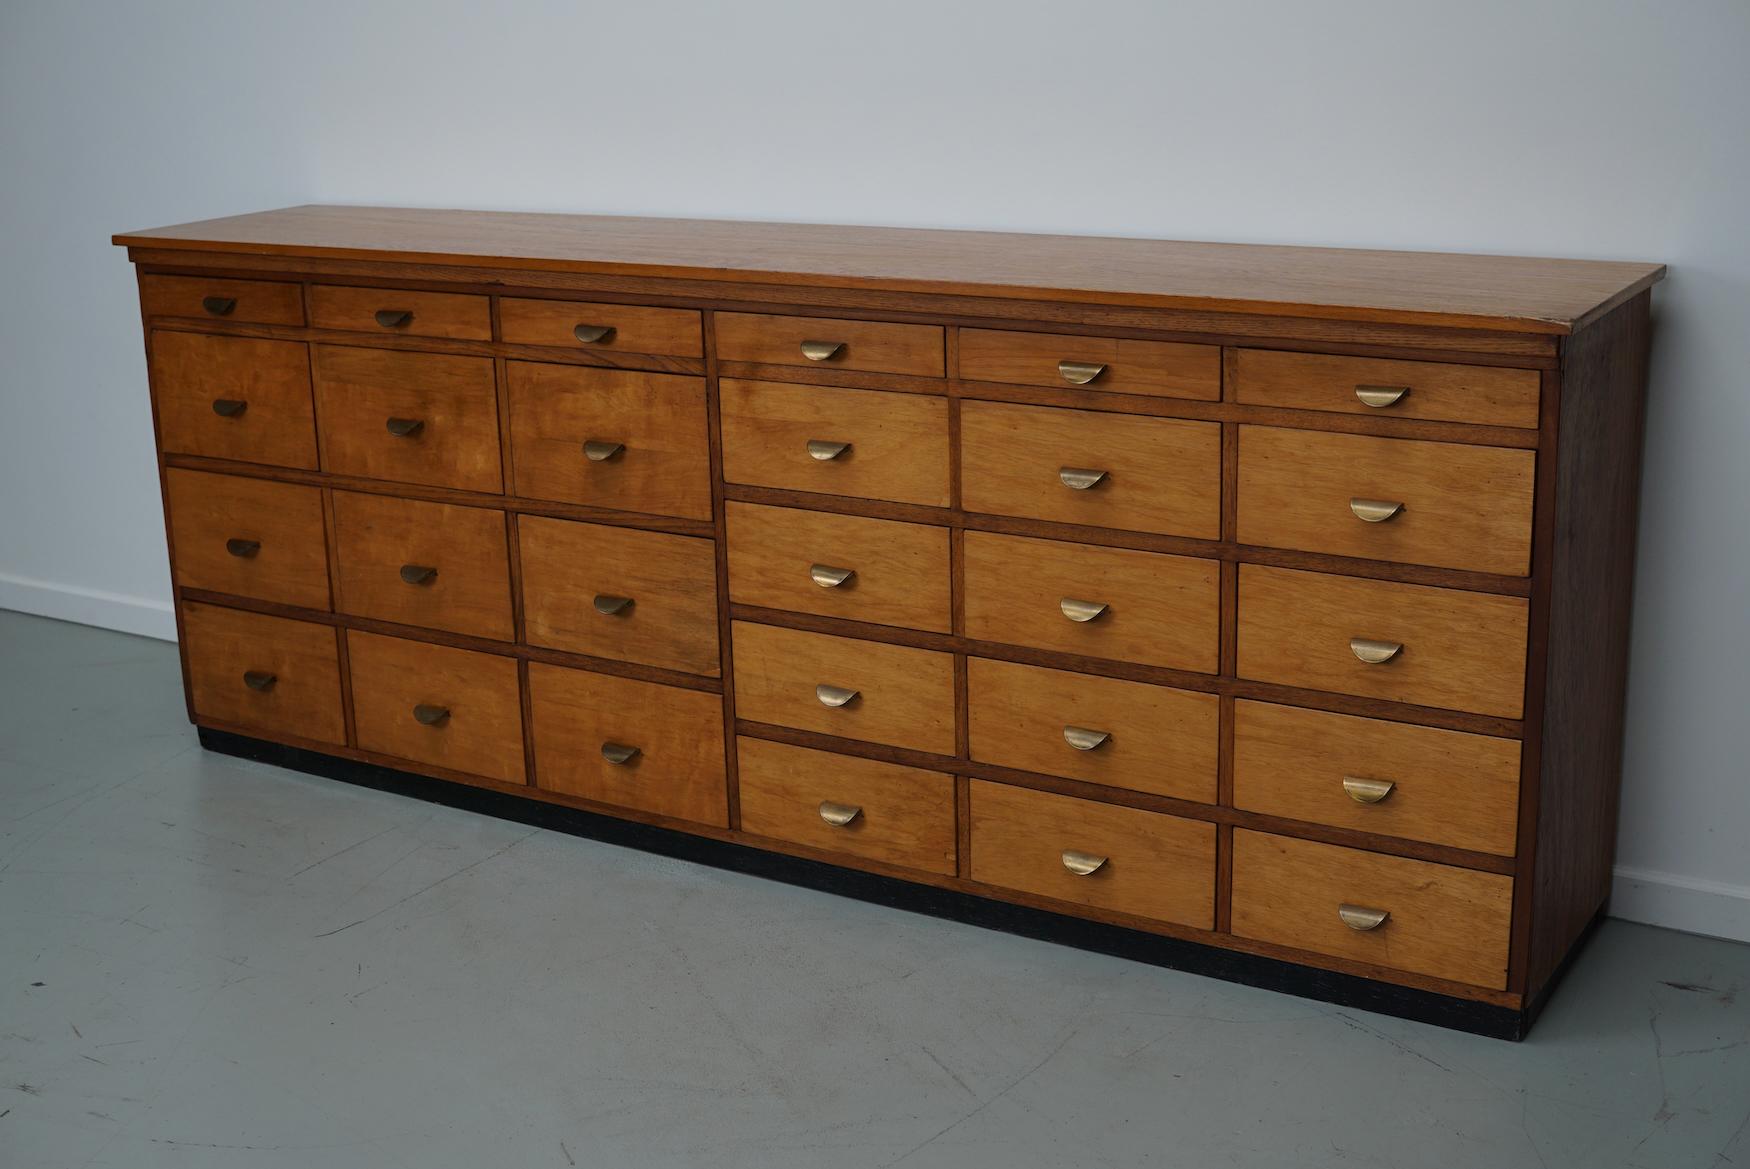 This apothecary cabinet was made circa 1950/60s in the Netherlands. The cabinet was used on a school to store painting supplies. It features 27 drawers in 3 different sizes with brass handles. The interior dimensions of the drawers are: D W H 31 x